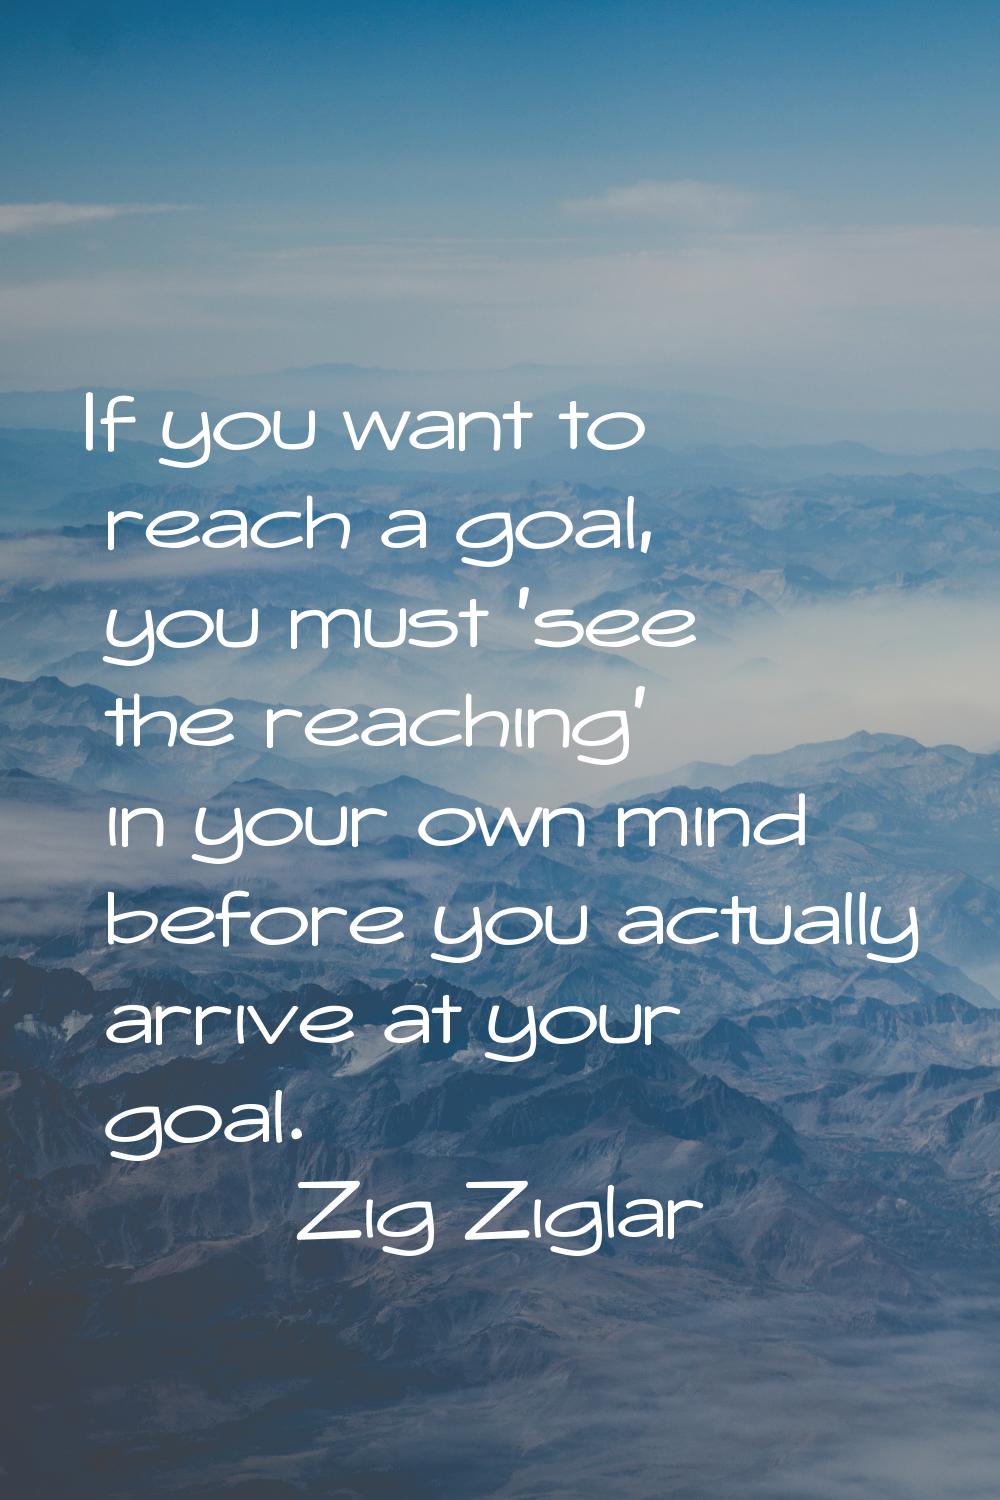 If you want to reach a goal, you must 'see the reaching' in your own mind before you actually arriv